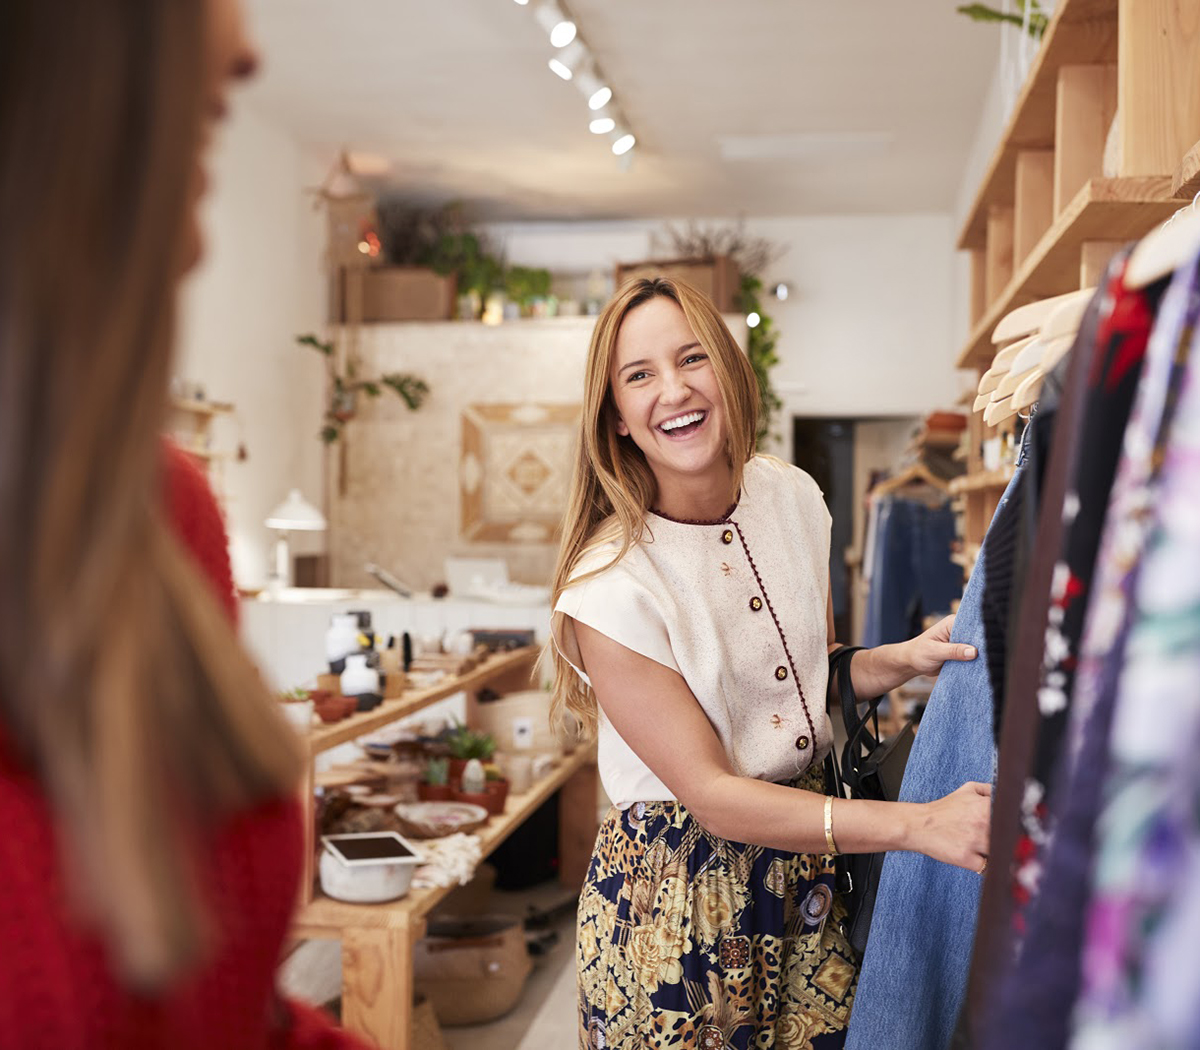 4 proven ways to build and maintain happy customers